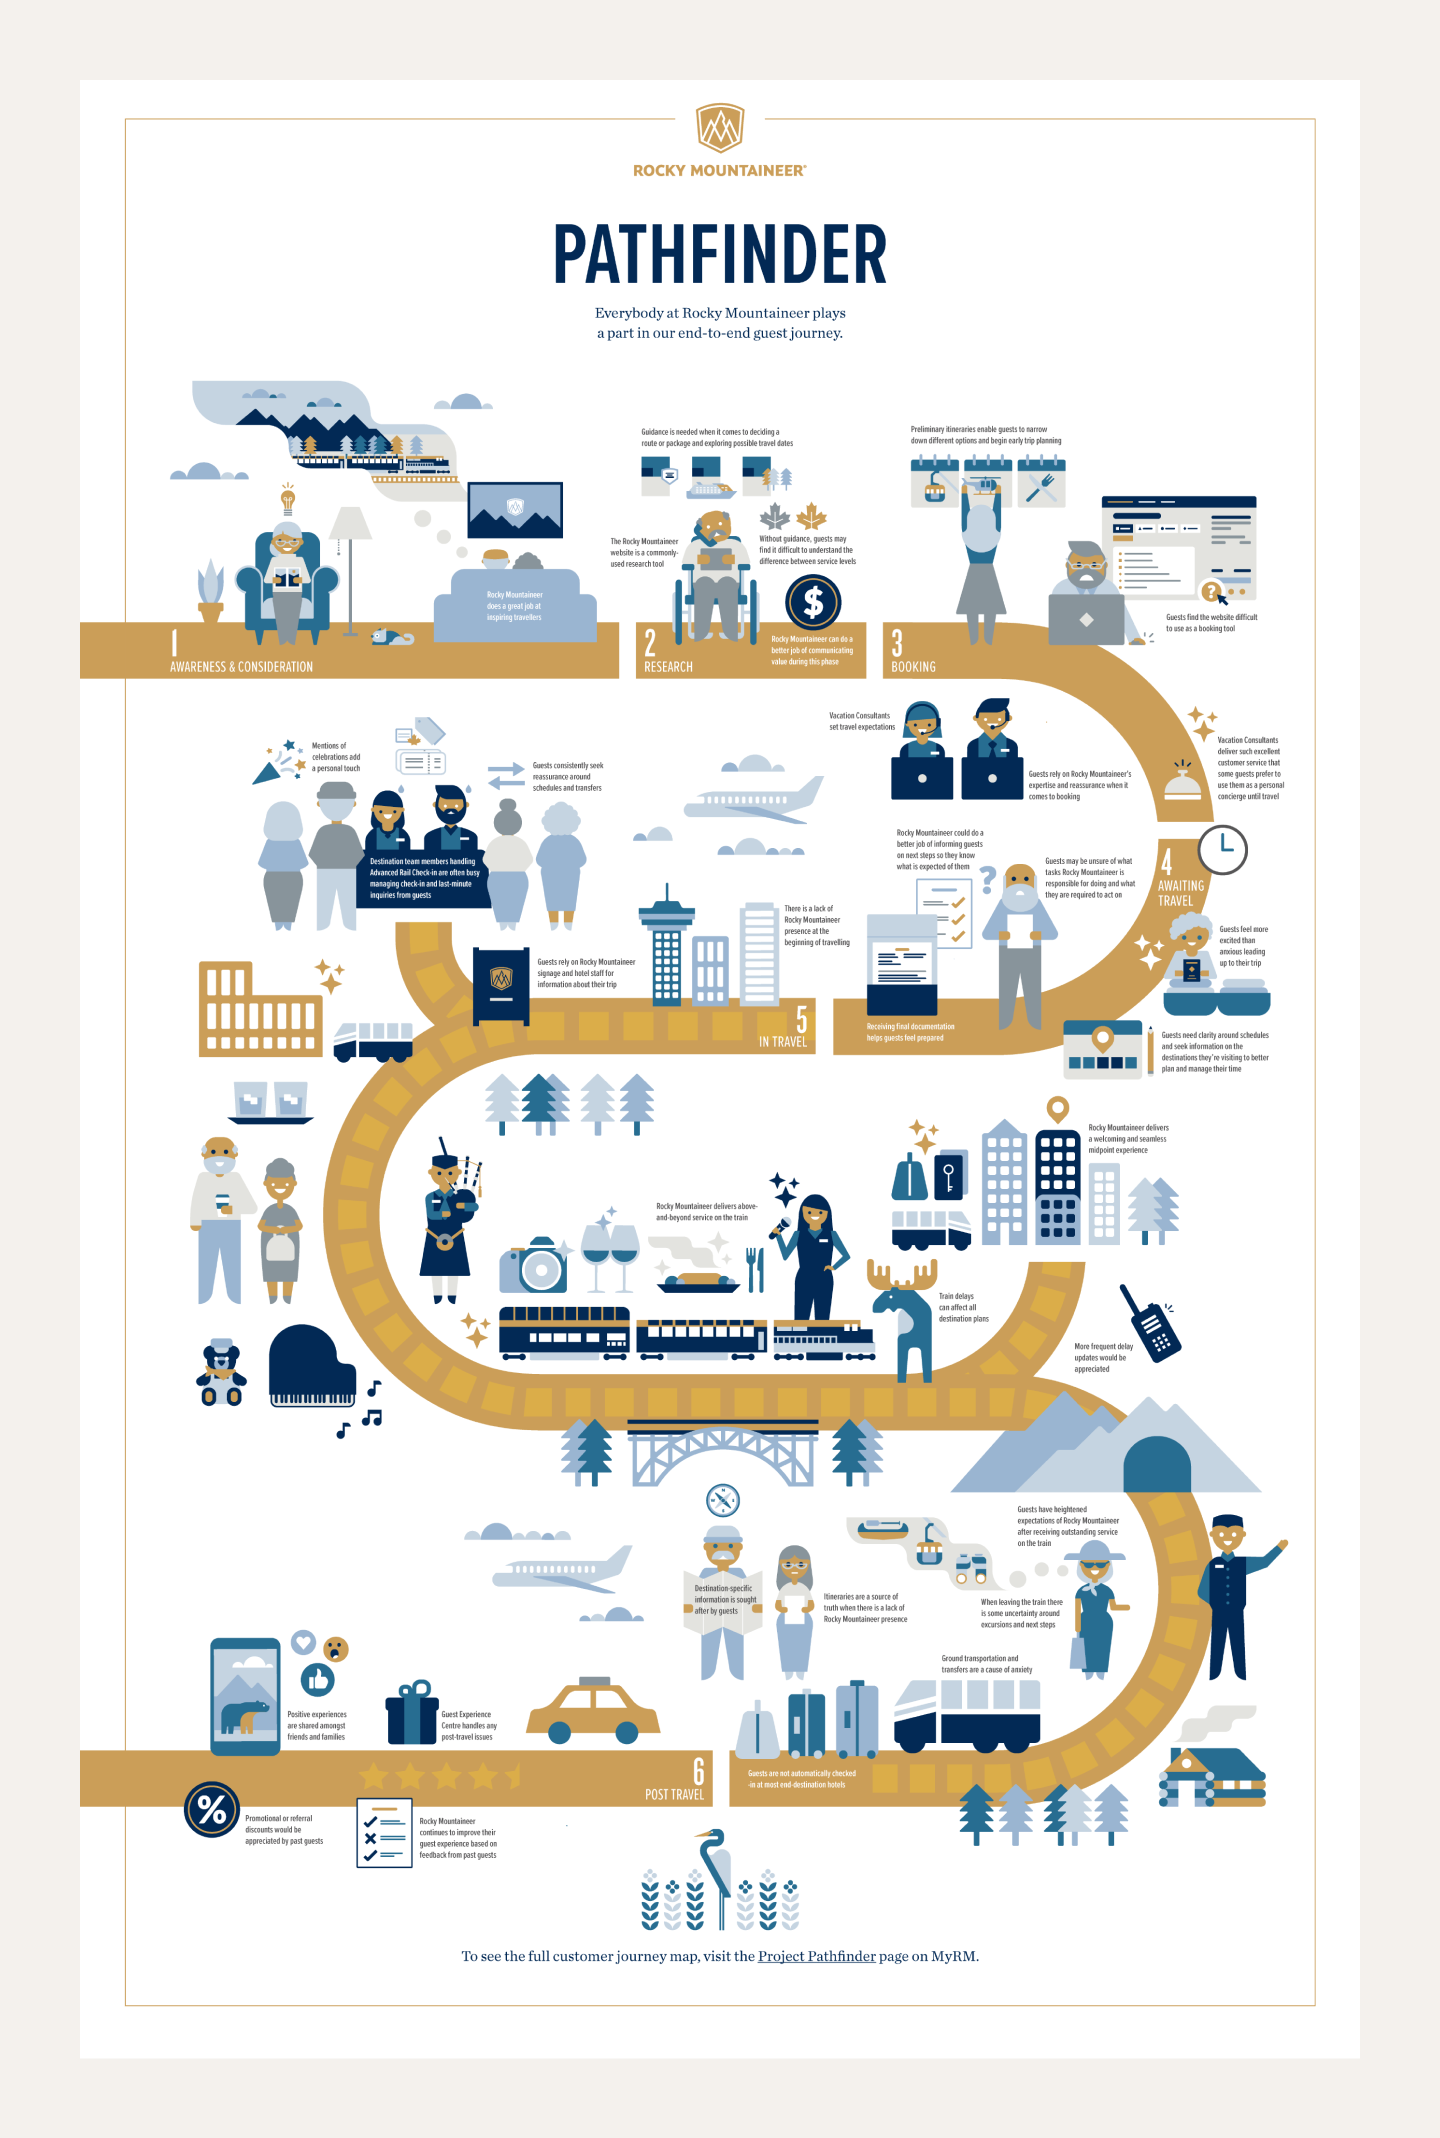 Illustrated and simplified version of the customer journey map